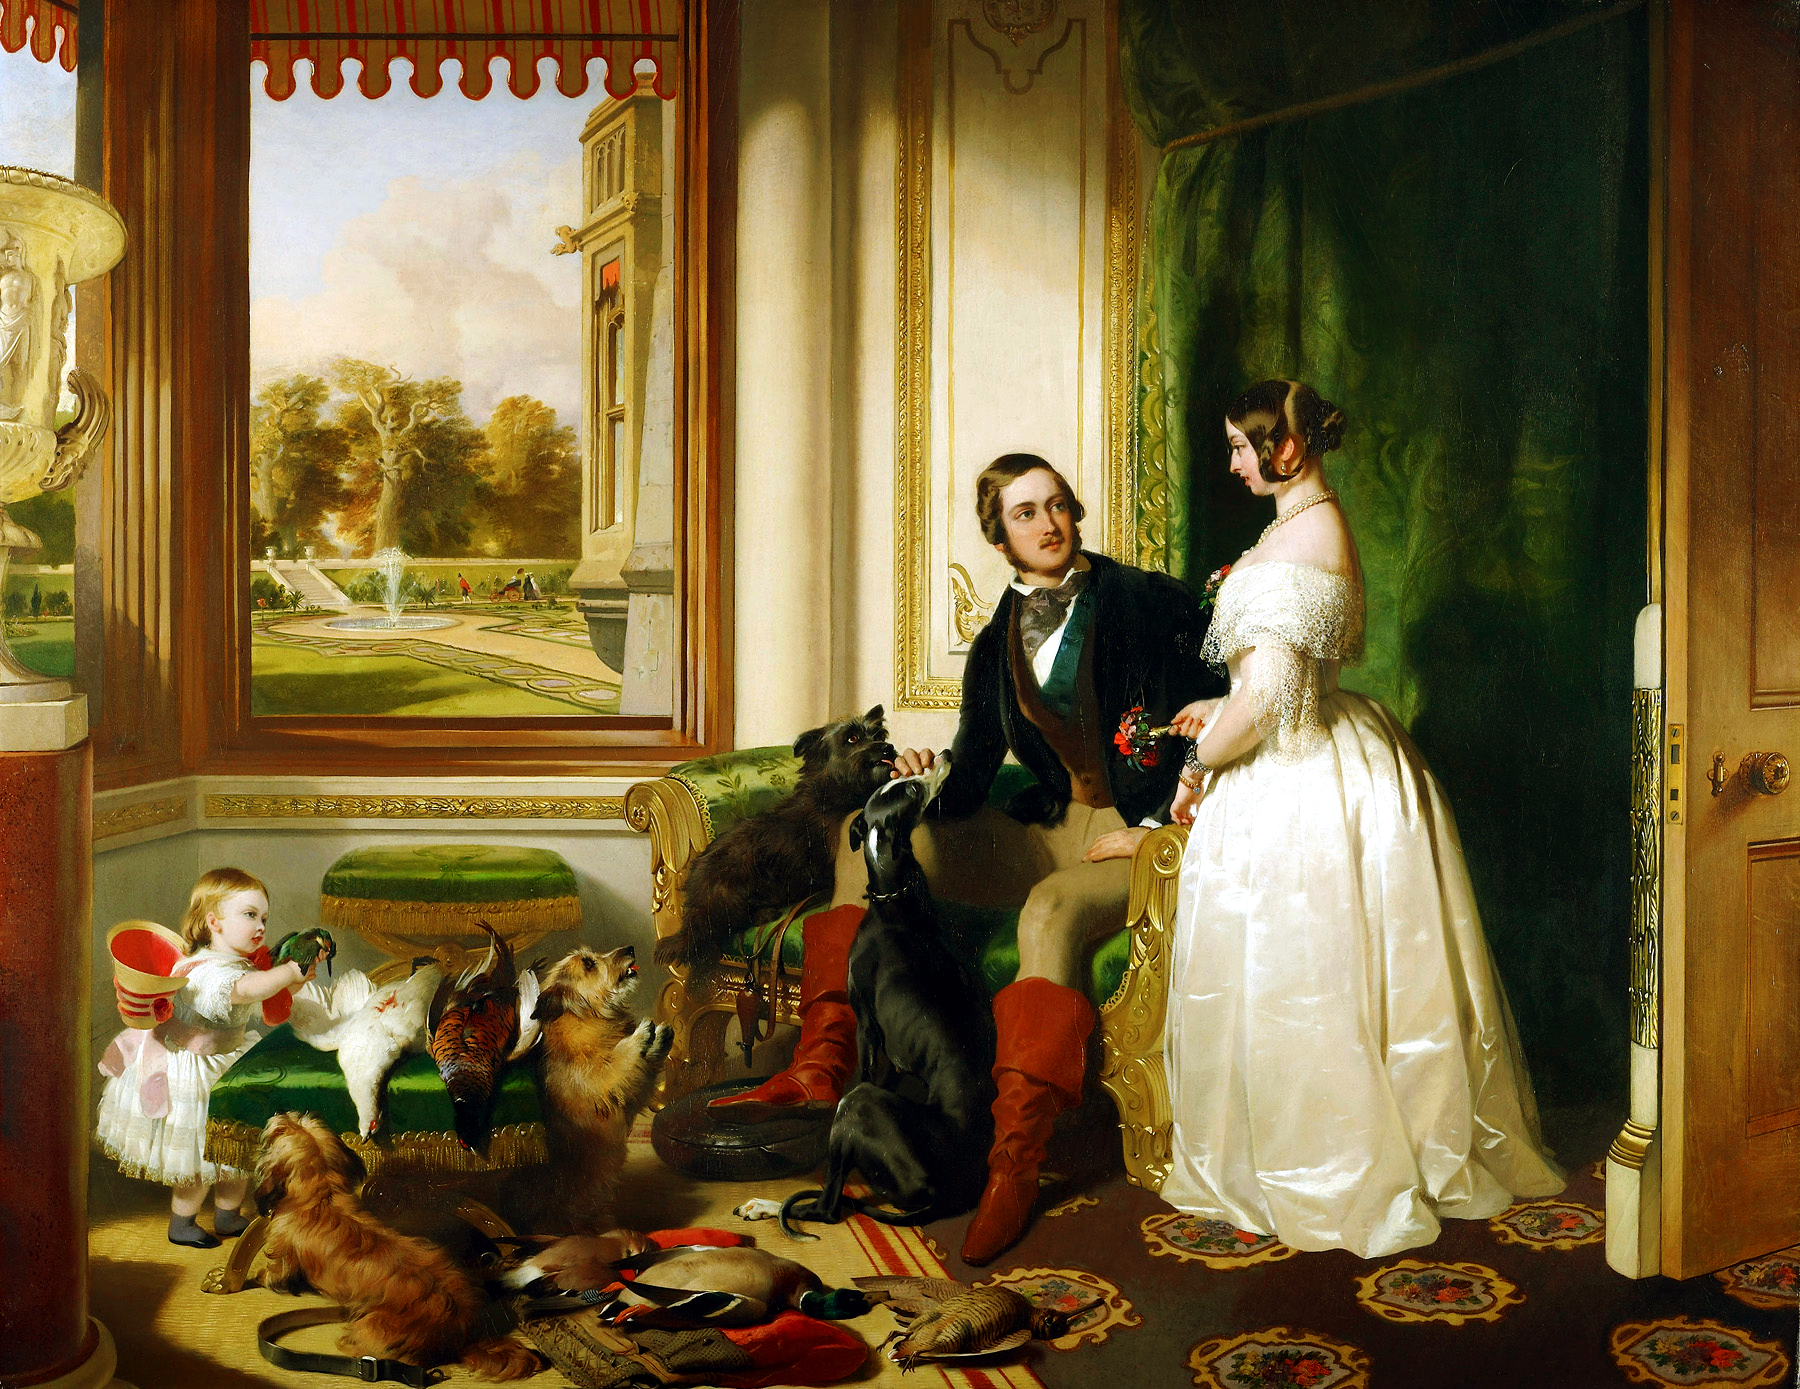 United States AI Solar System (7) - Page 22 Queen-victoria-and-prince-albert-at-home-at-windsor-castle-in-berkshire-england-1843